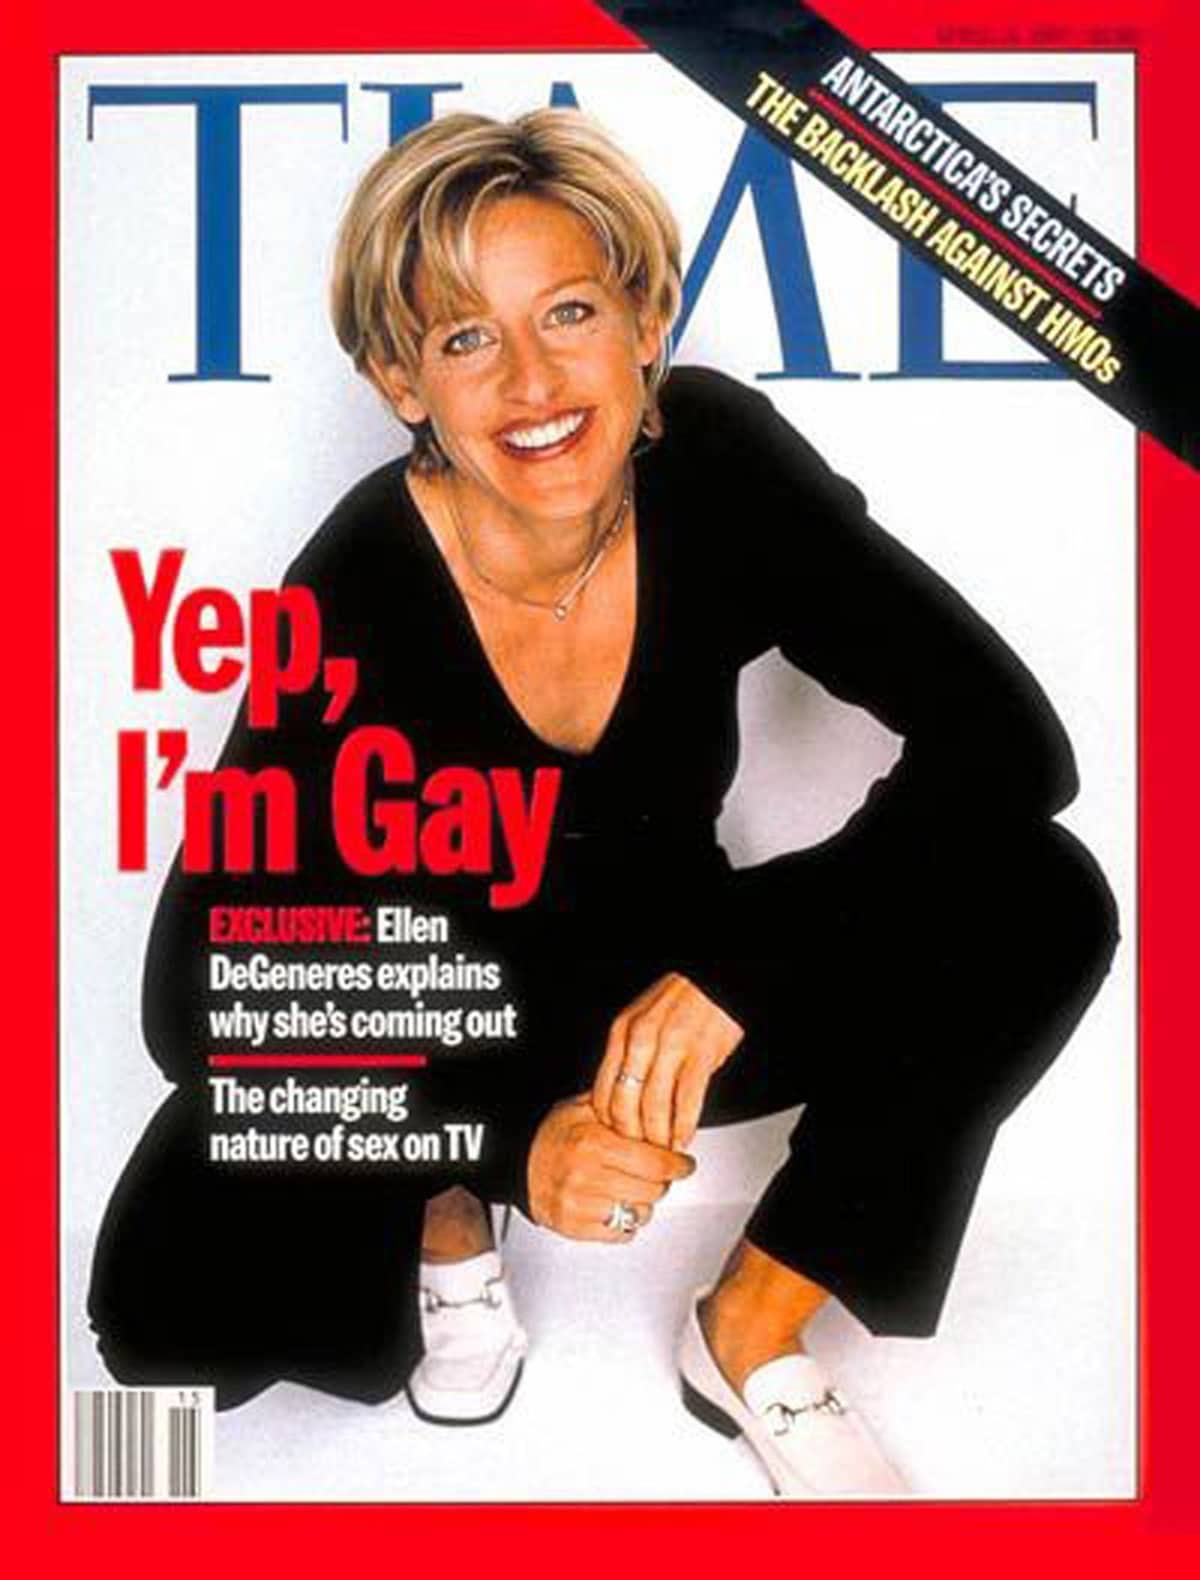 Ellen DeGeneres came out on the cover of TIME magazine in 1997 with the headline ‘Yep, I’m Gay’